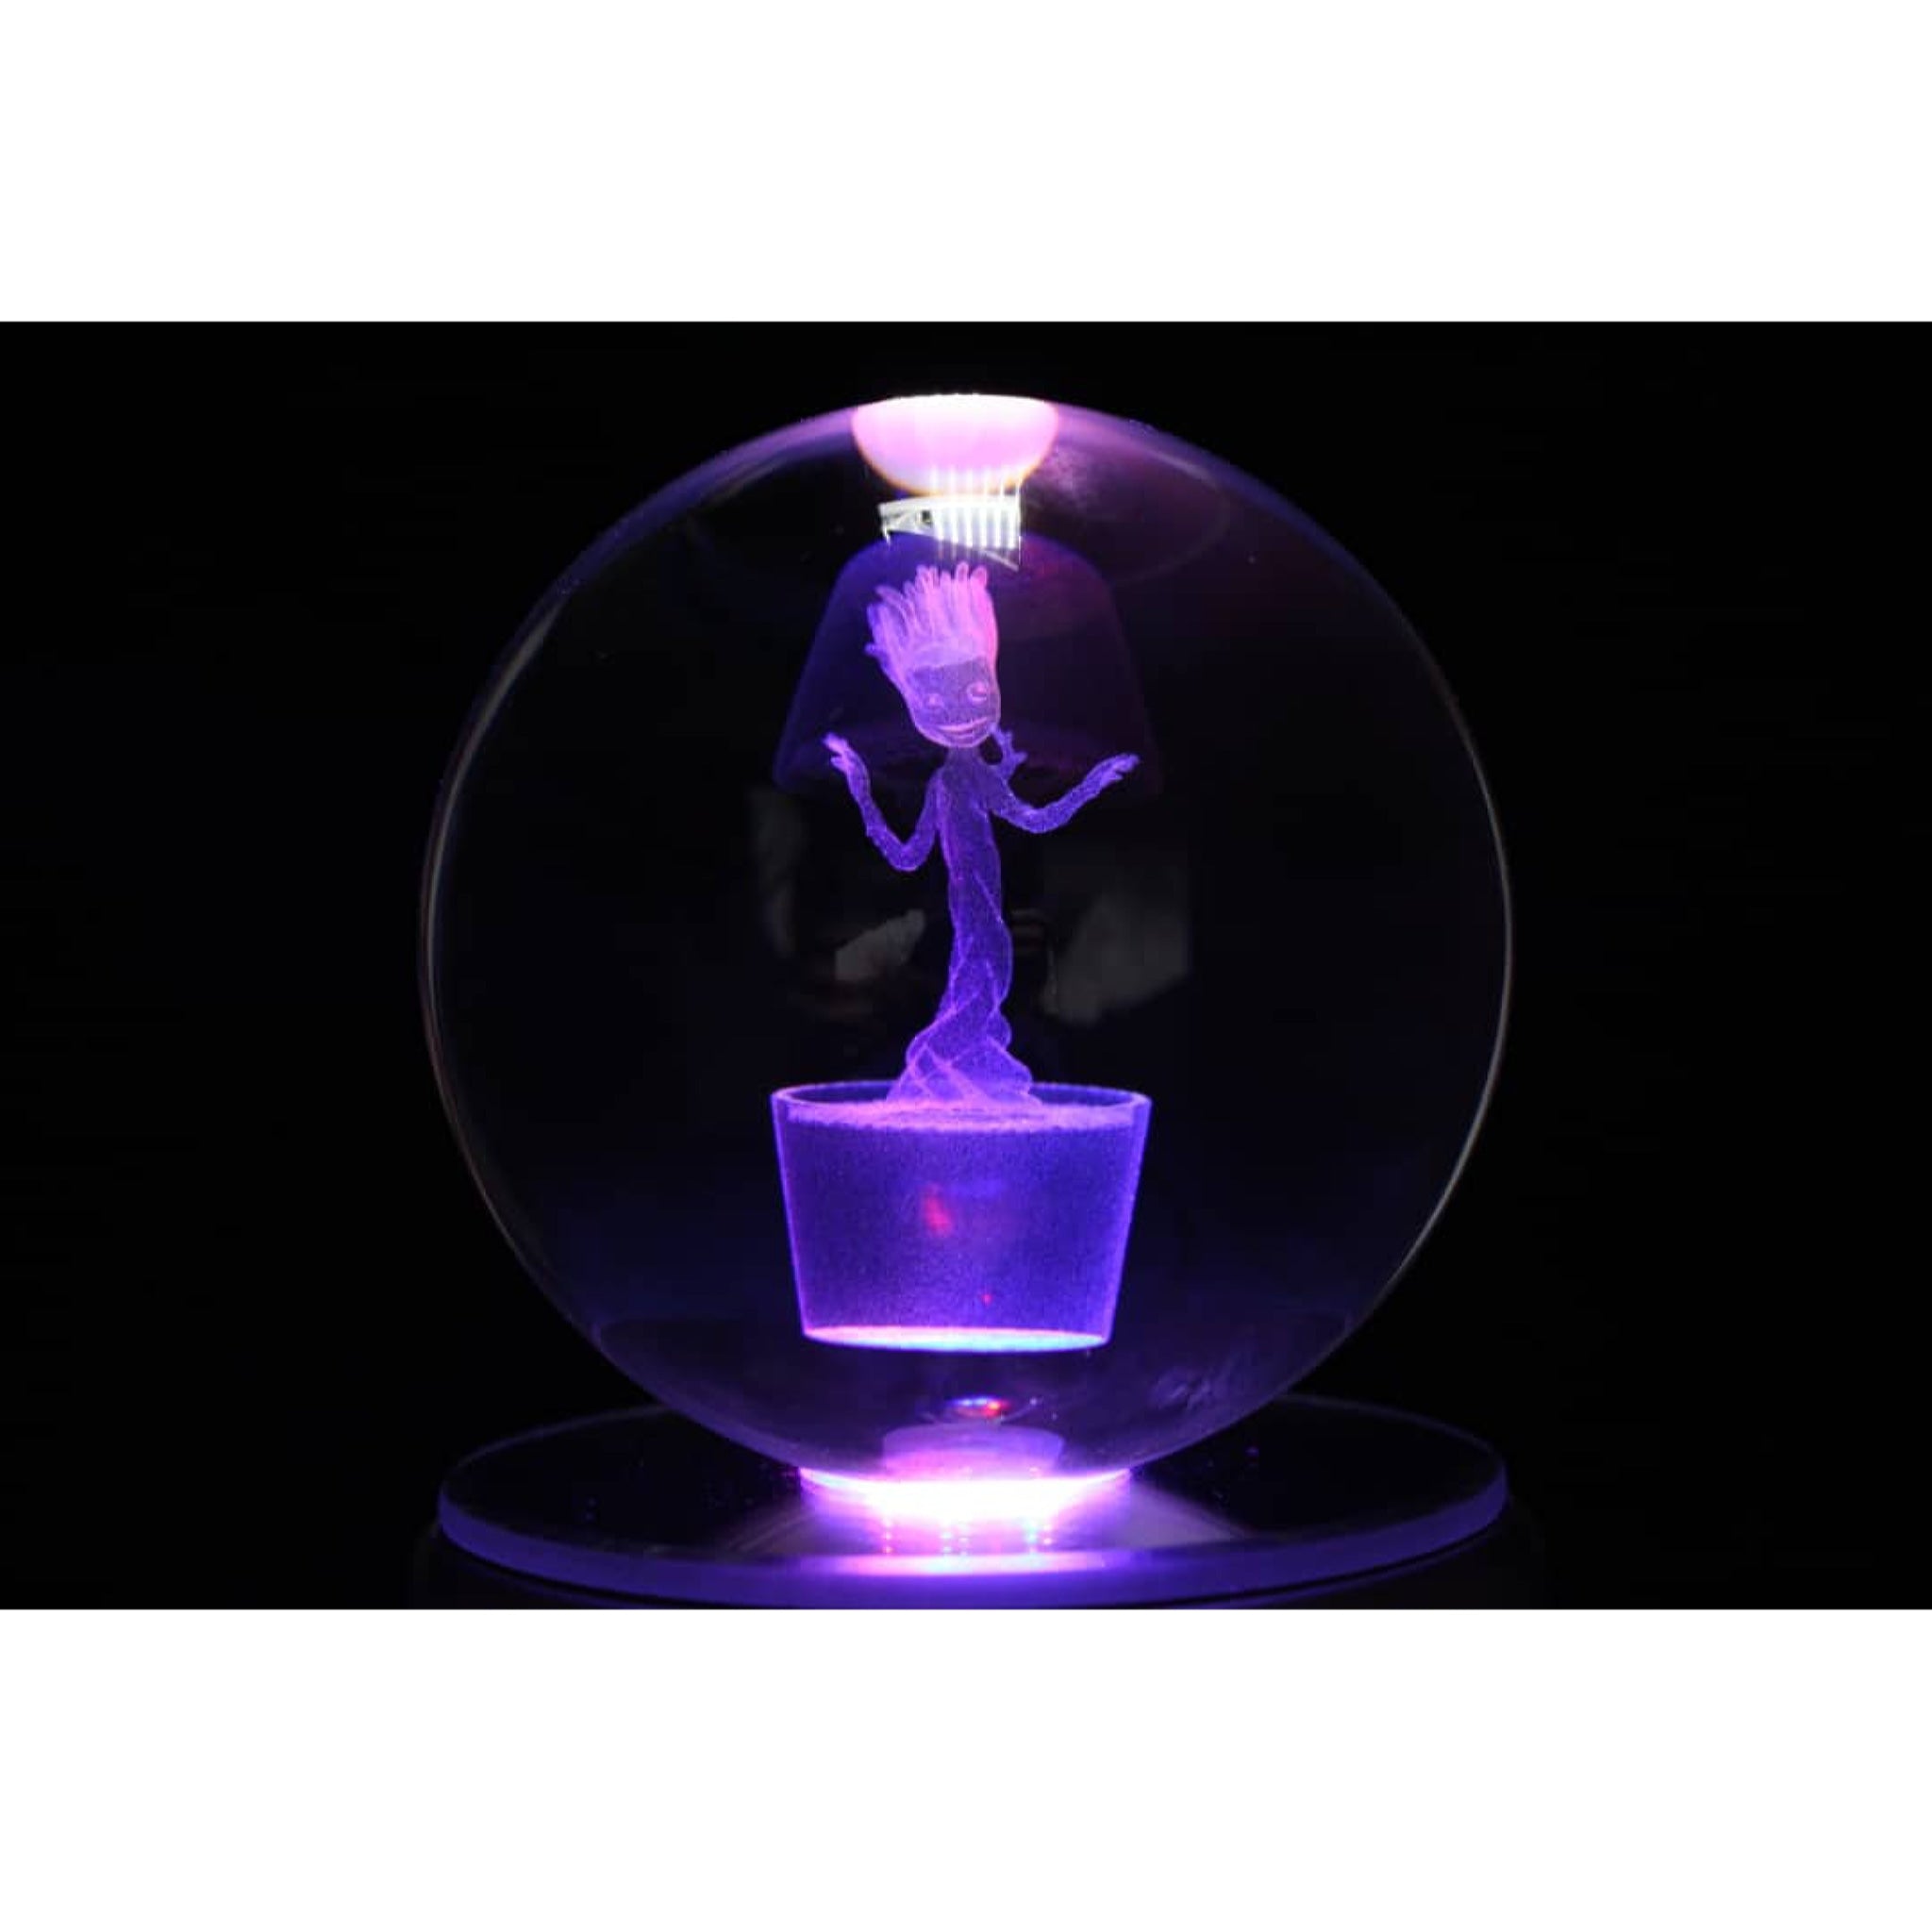 Groot Character Glass Crystal Ball 55 with Light-Up LED Base Ornament 80mm XL Size